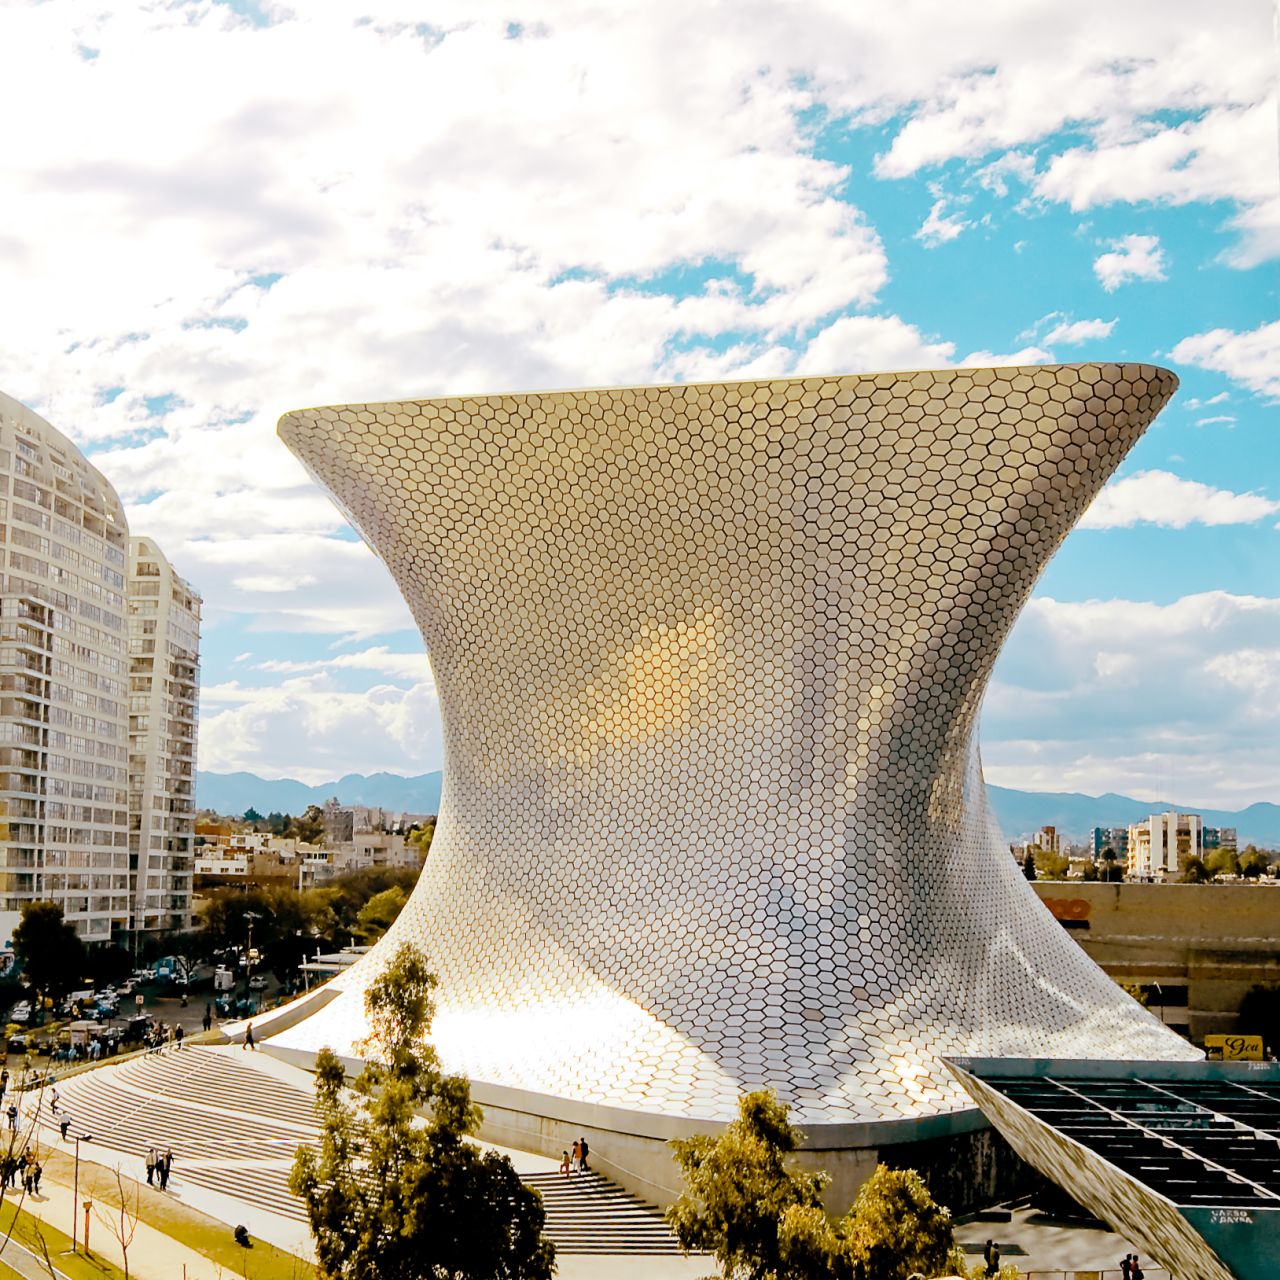 Fernando Romero designed the jaw-dropping Soumaya Museum in Mexico City. The building is clad in aluminium to reflect the ornamental value of the museum's collection, which includes Baroque and 14th century European art.